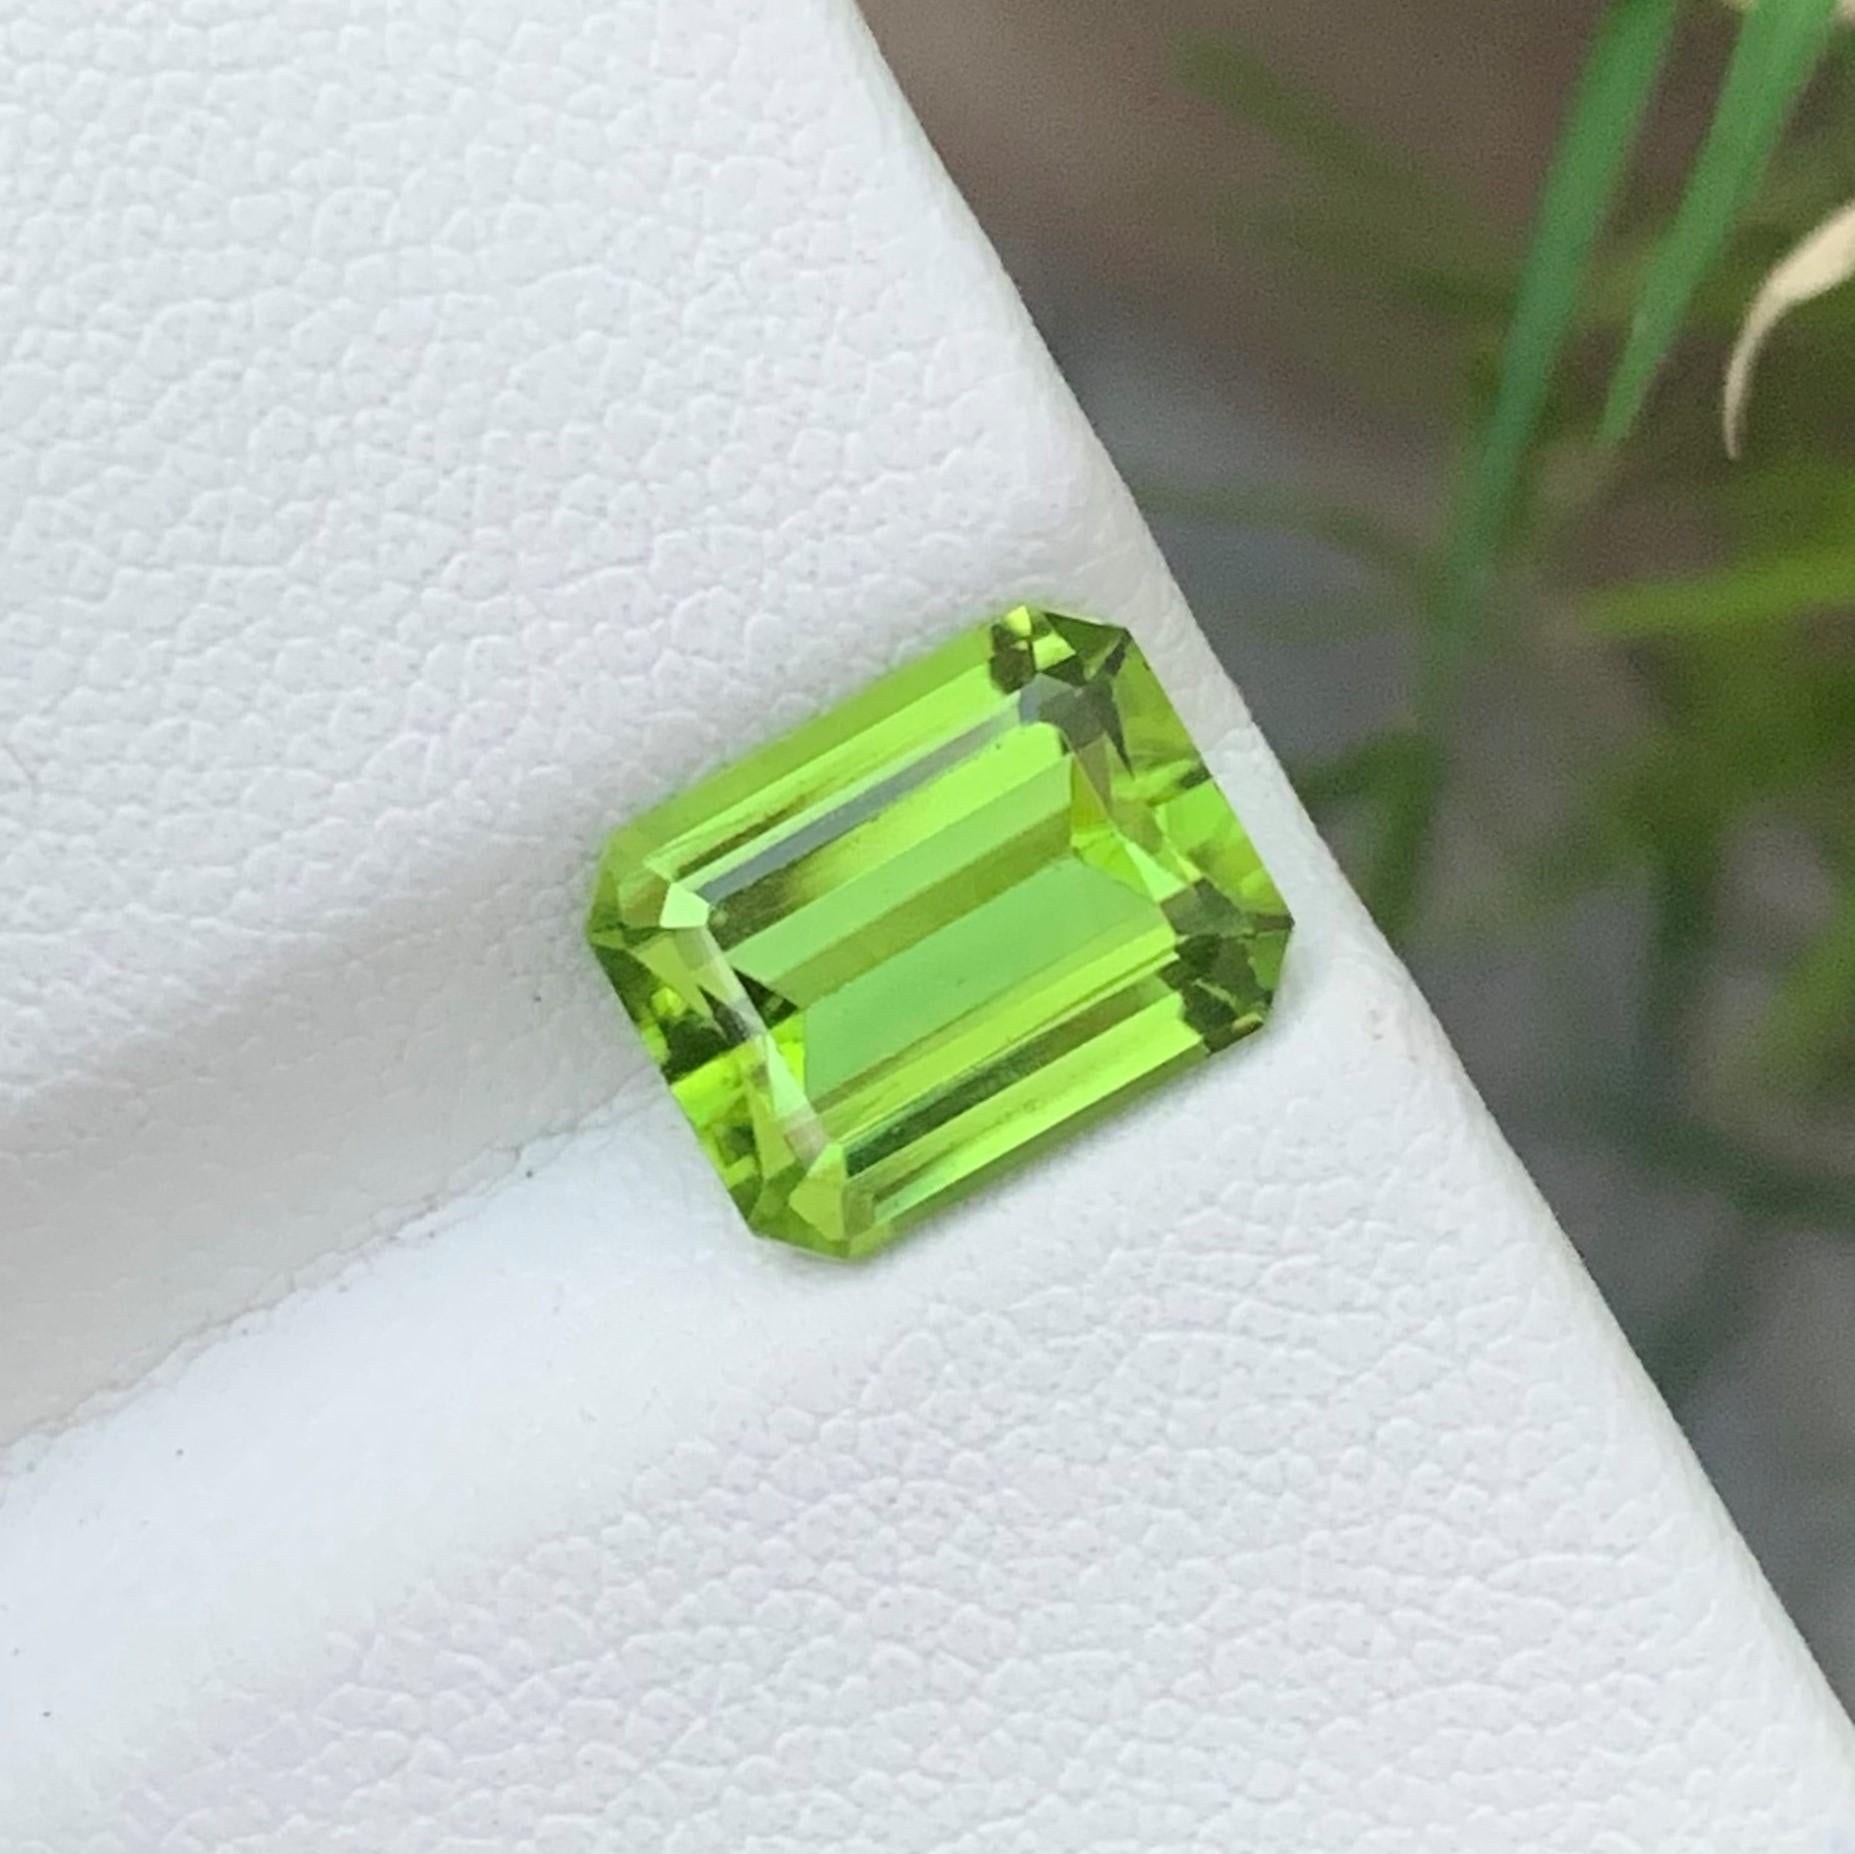 Gemstone Type : Peridot
Weight : 2.95 Carats
Dimension: 9.5x7.4x4.7 Mm 
Origin : Suppat Valley Pakistan
Clarity : Eye Clean
Certificate: On Demand
Color: Green
Treatment: Non
Shape: Emerald
It helps cure diseases related to lungs, breasts,